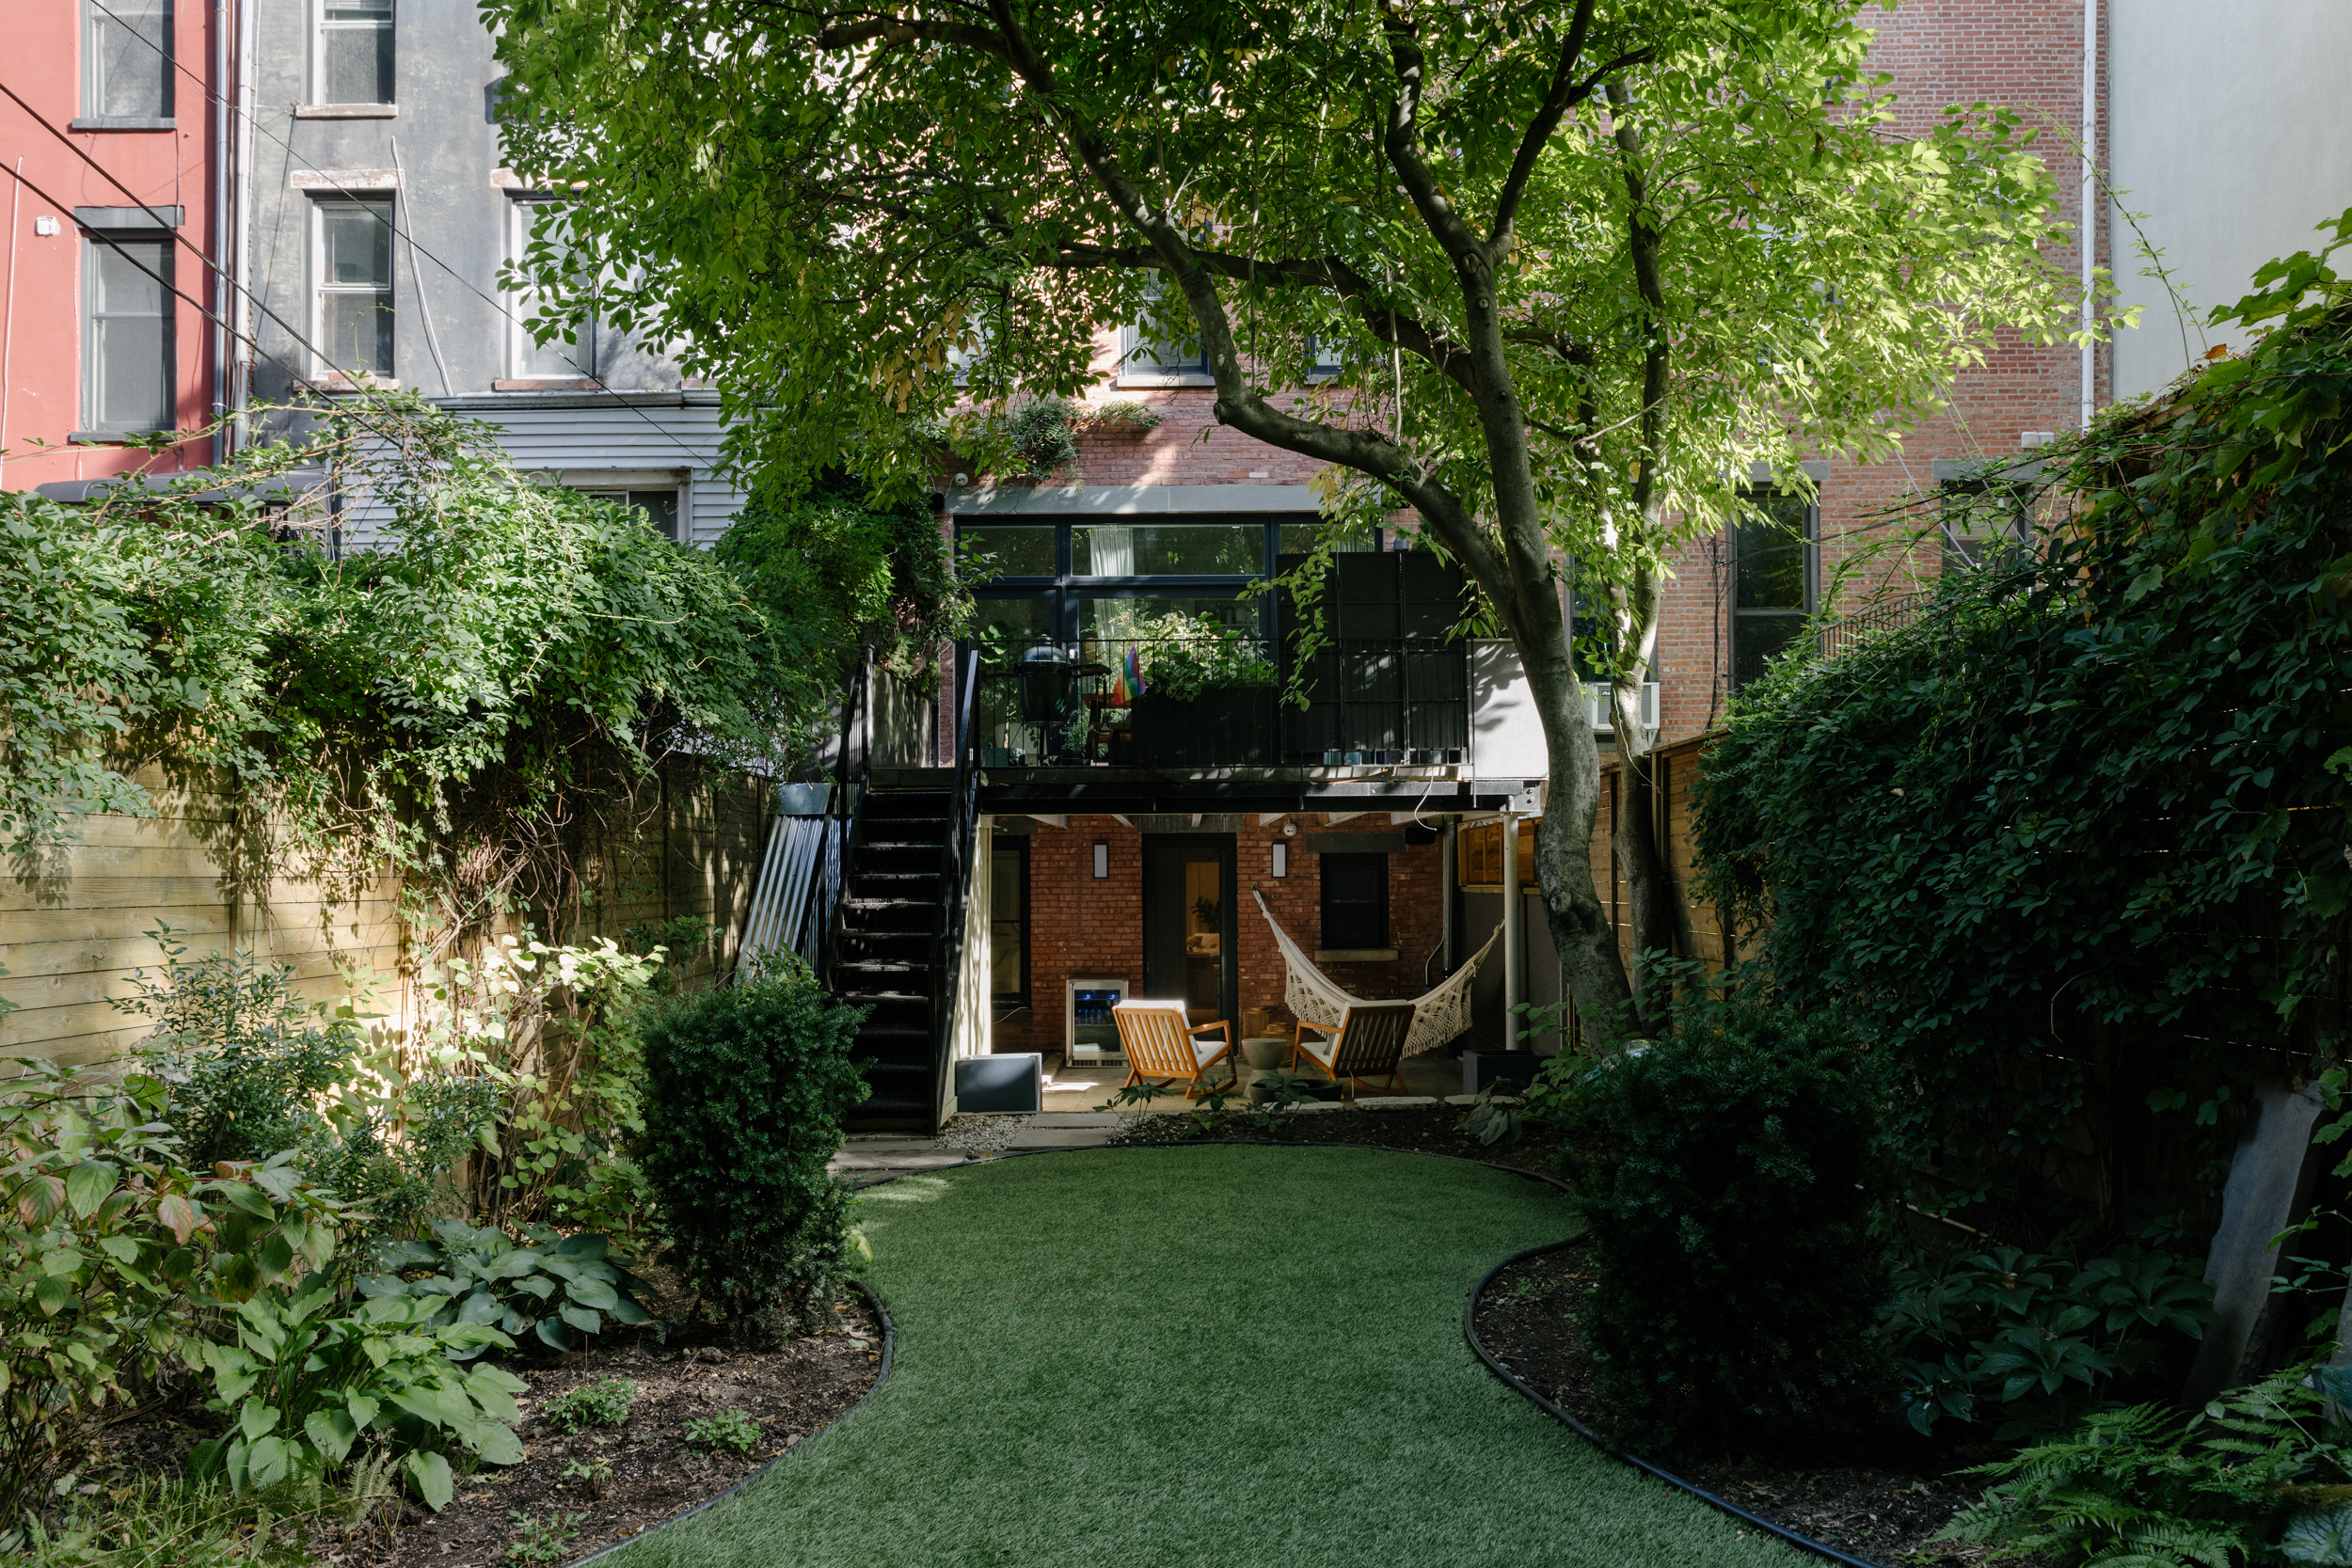 casa olympia brooklyn brownstone backyard space with lush foliage, hanging deck, and patio with hammock